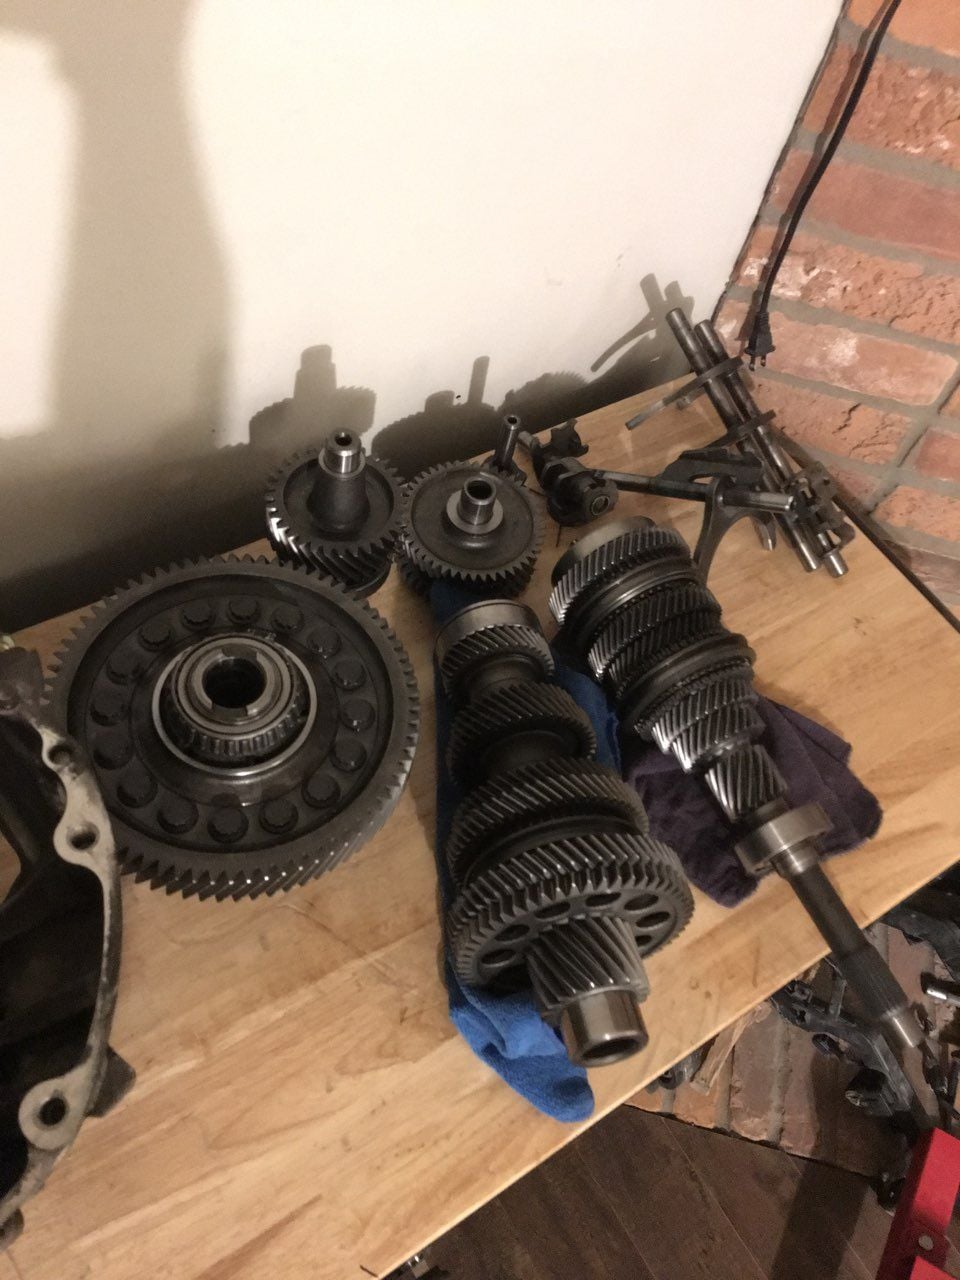 Drivetrain - EXPIRED: TL SH-AWD 6MT gear set/3.8 final drive - Used - 2010 to 2014 Acura TL - 2003 Acura CL - 2004 to 2008 Acura TL - Oakville, ON L6H 4A, Canada